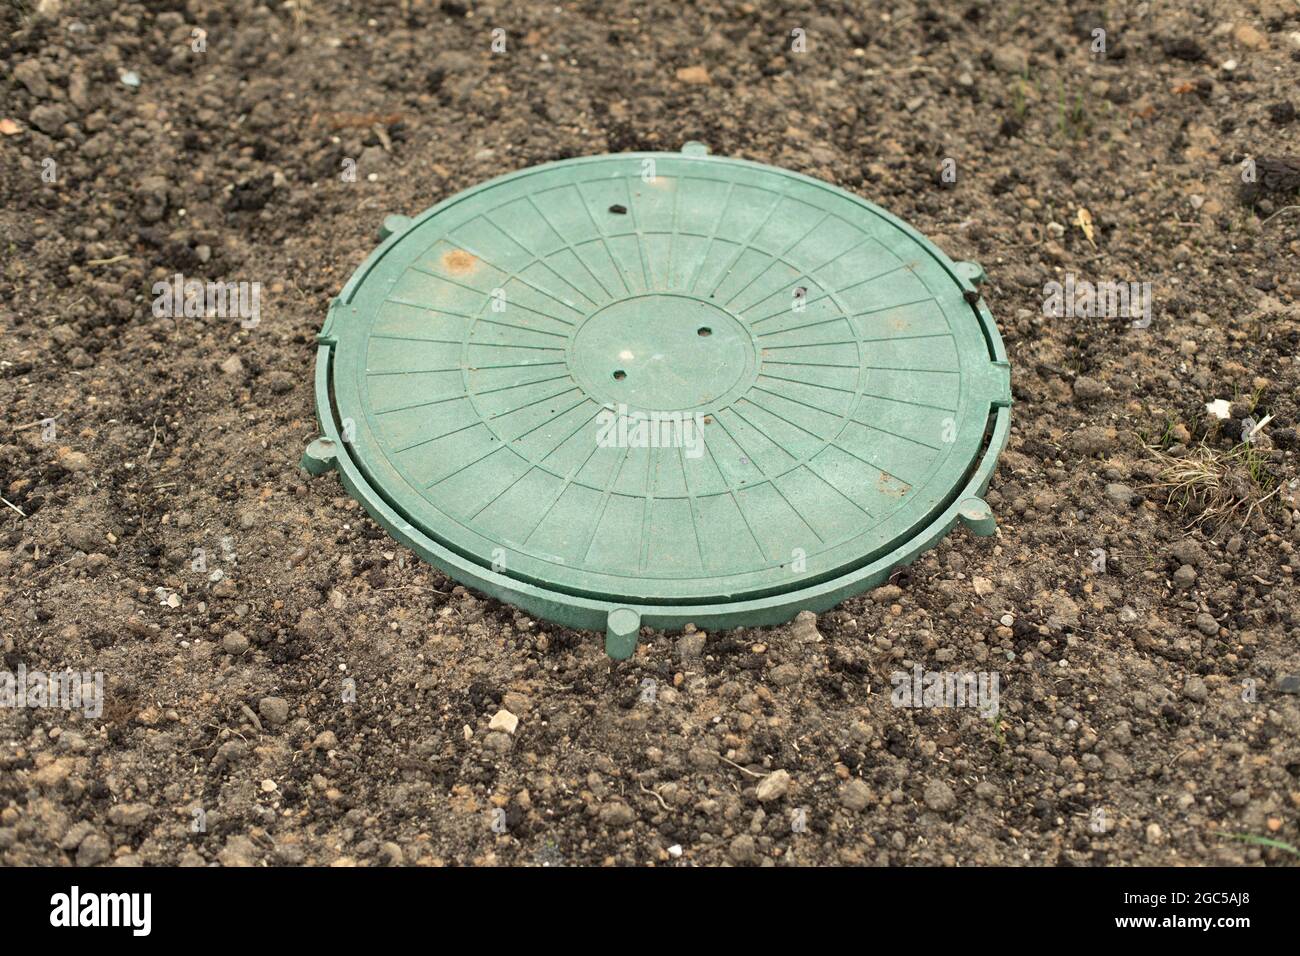 Sewer hatch in the ground. Round plastic cover to close access to sewer pipes. Green hatch of urban communications. Stock Photo